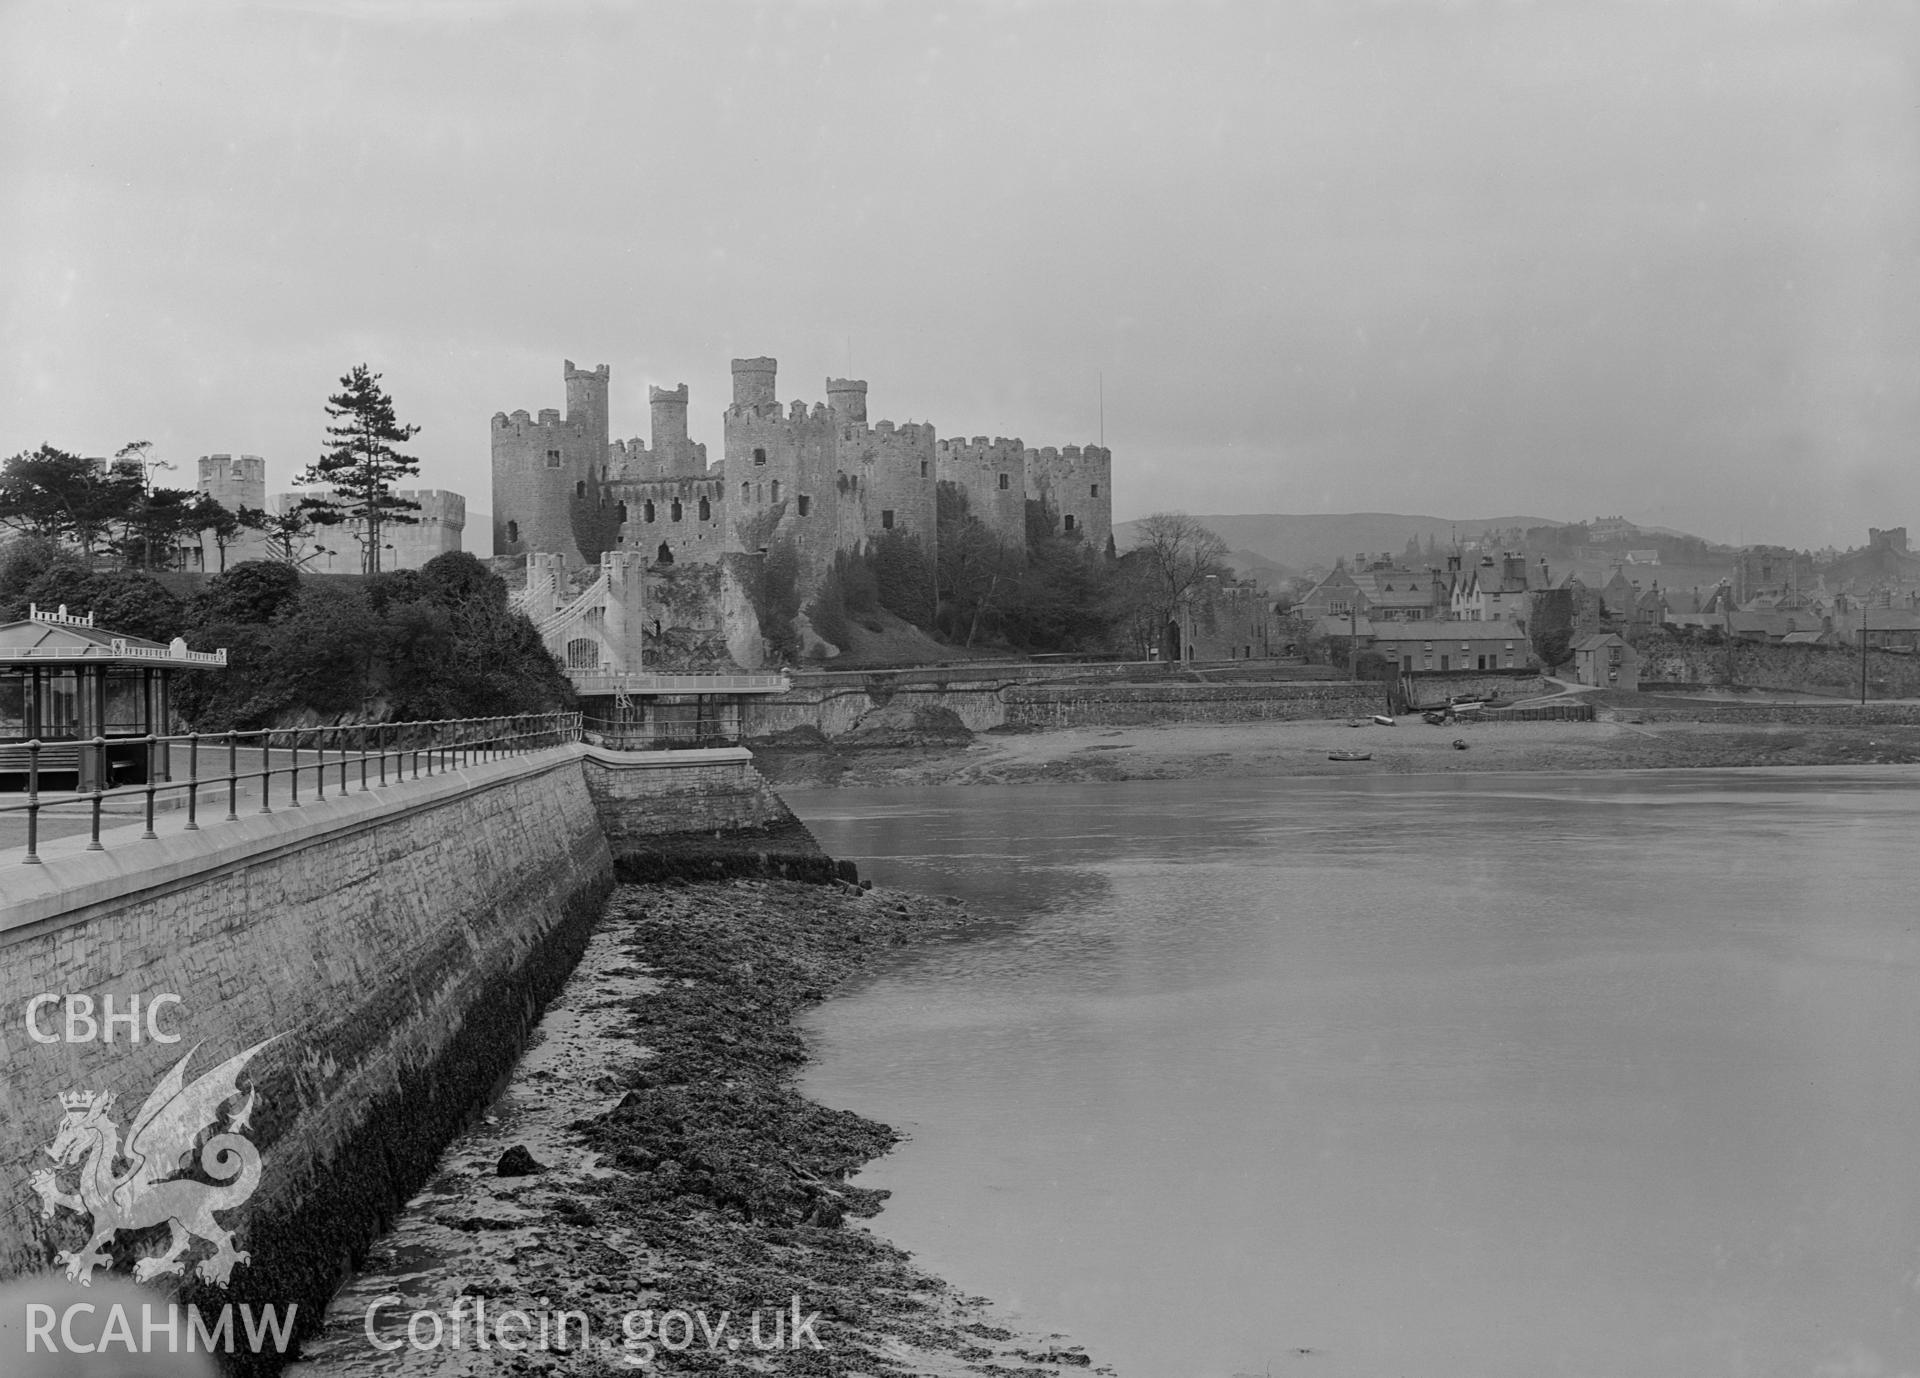 View of Conwy Castle from the east.